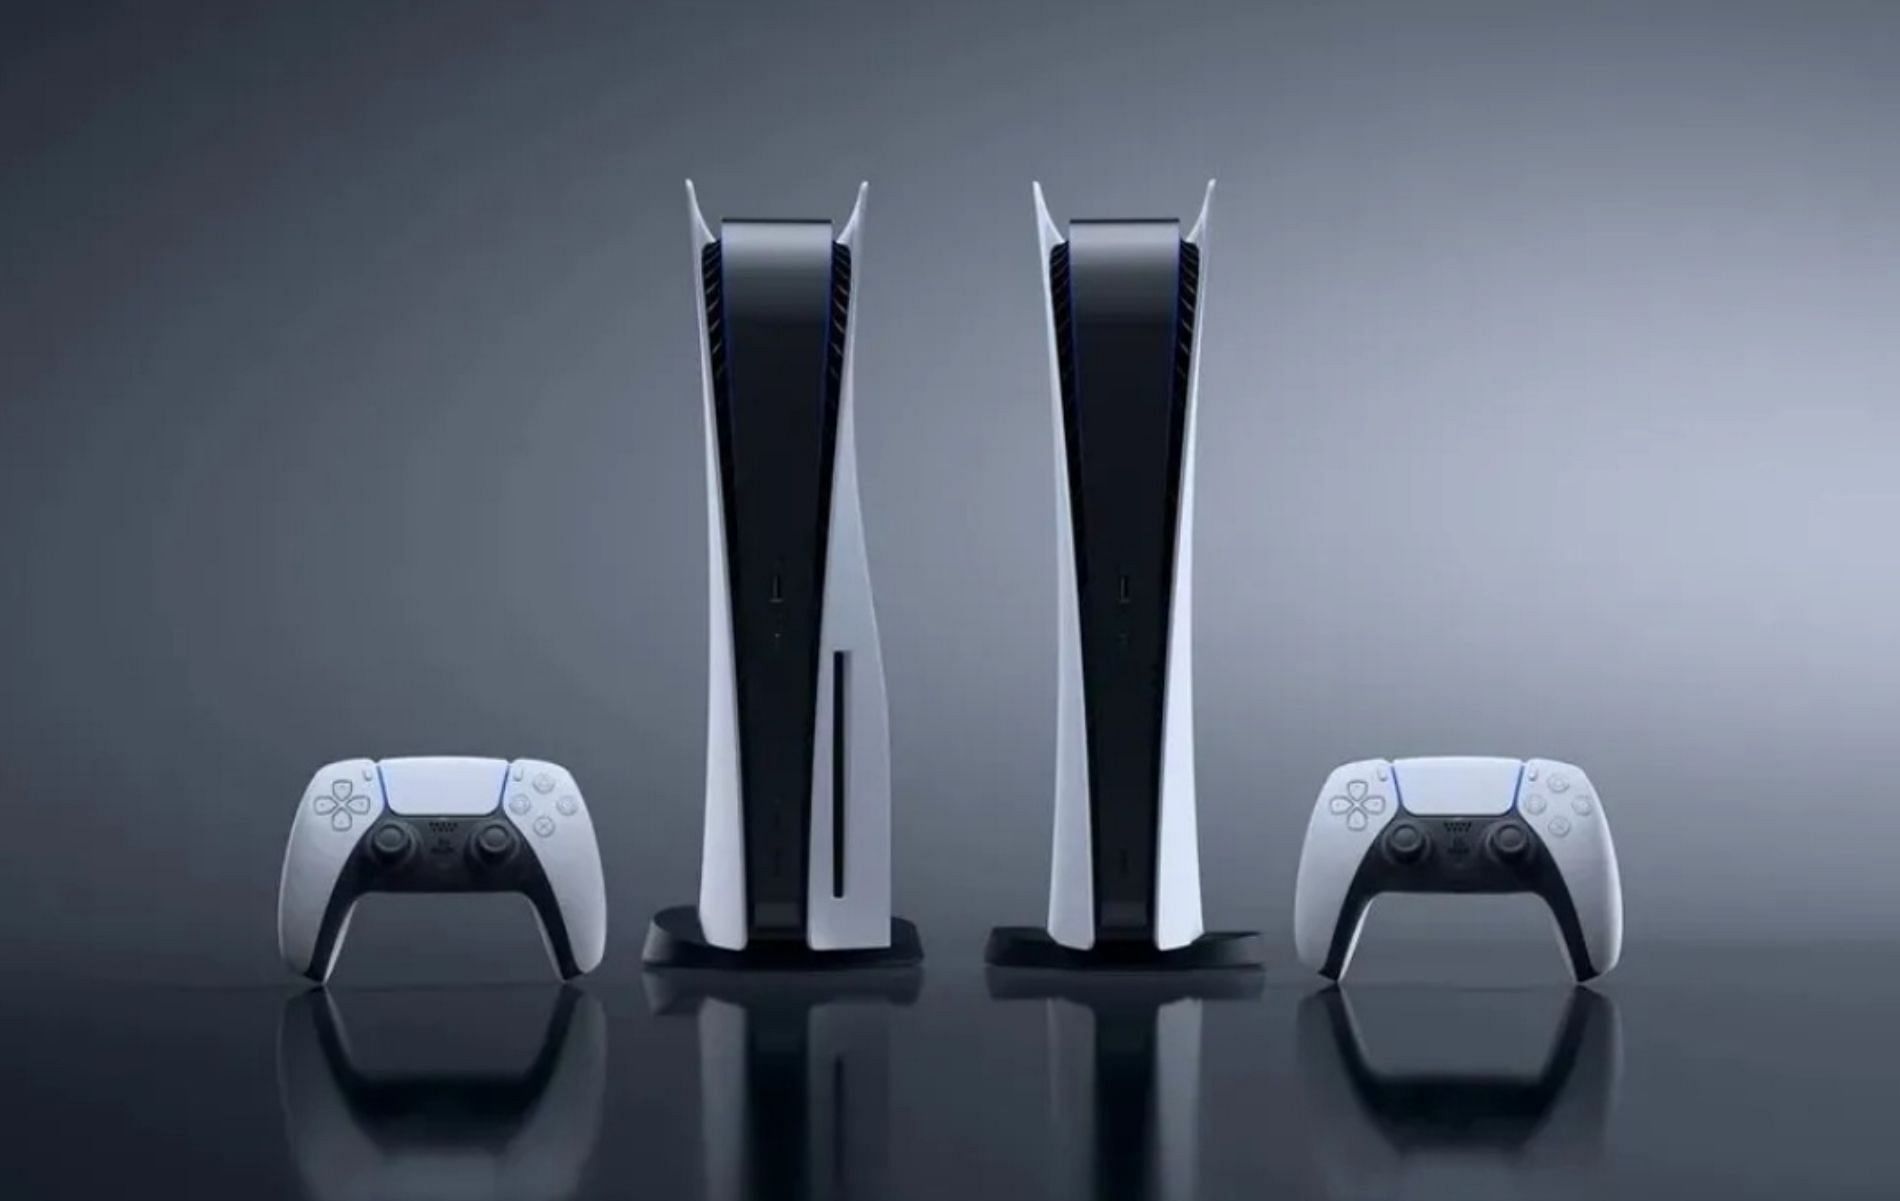 the standard and the digital PS5 models (Image via Sony)